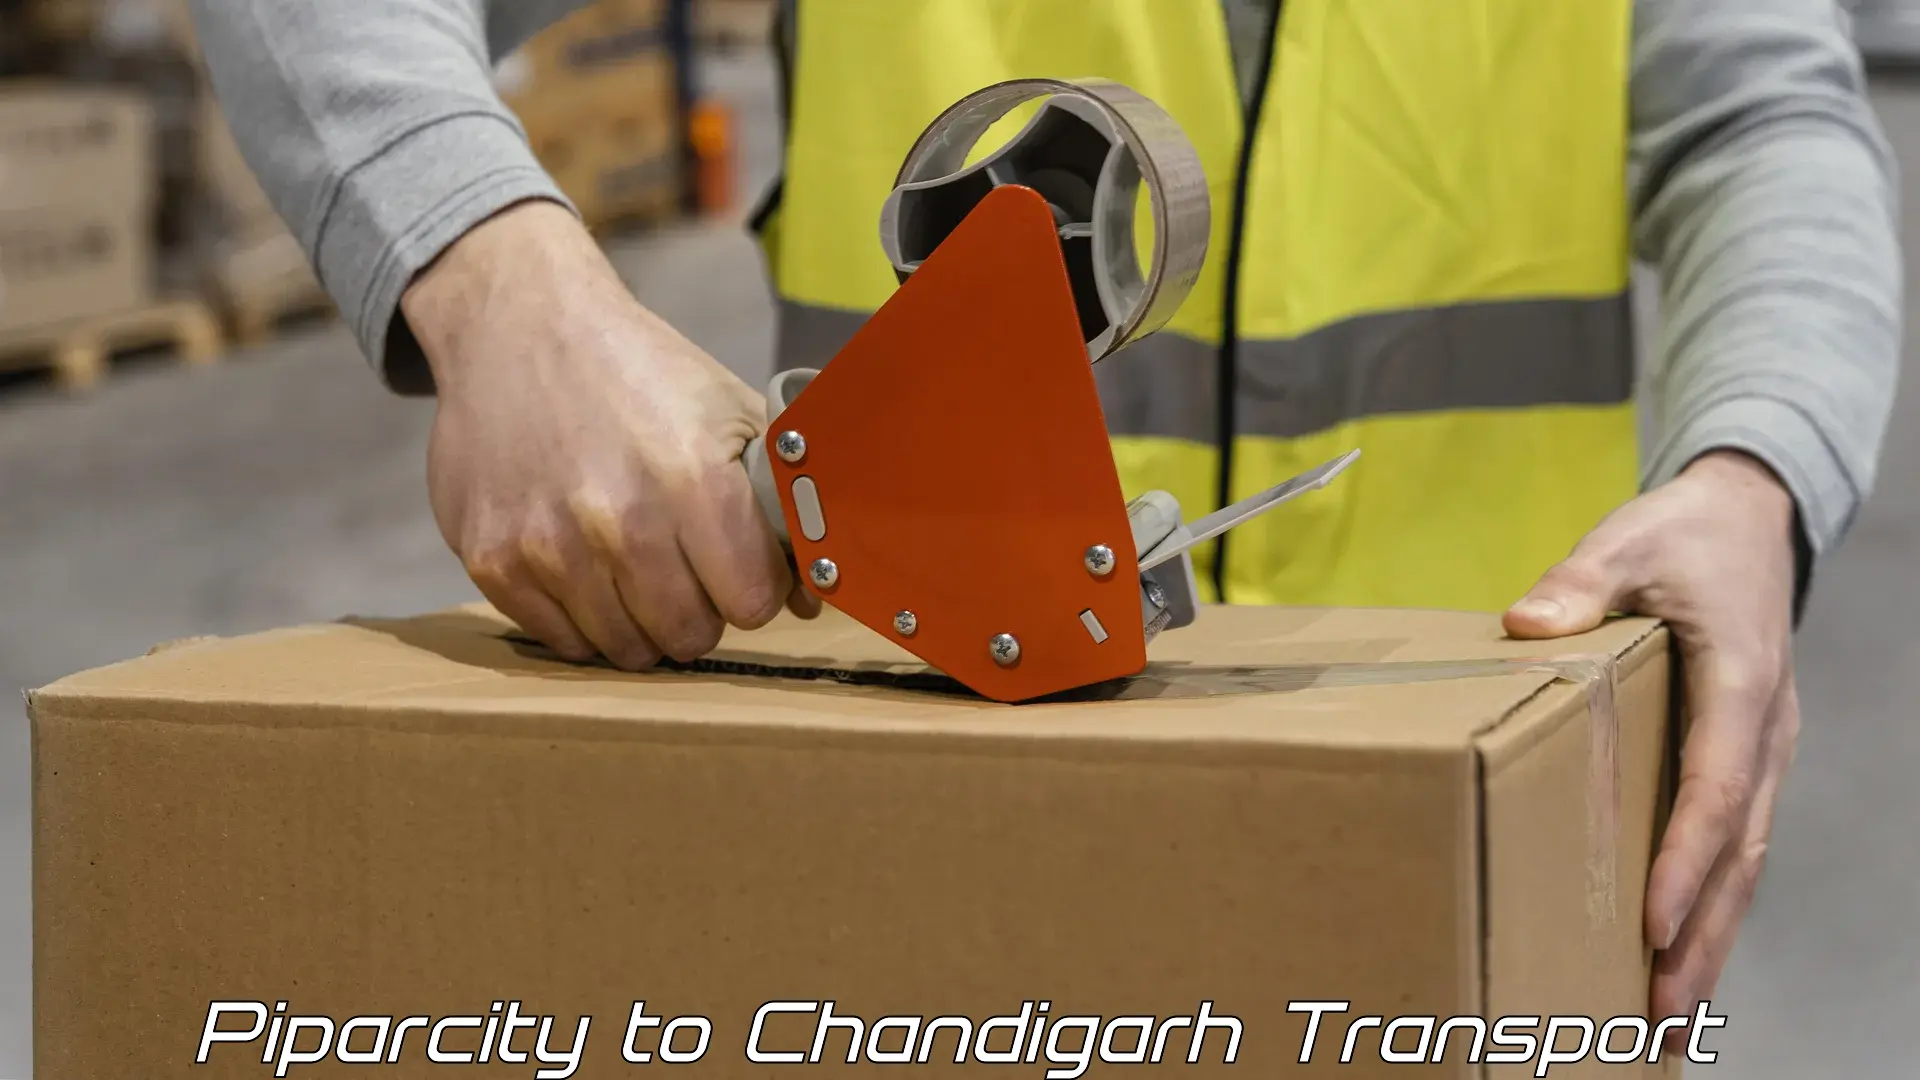 Two wheeler parcel service Piparcity to Chandigarh